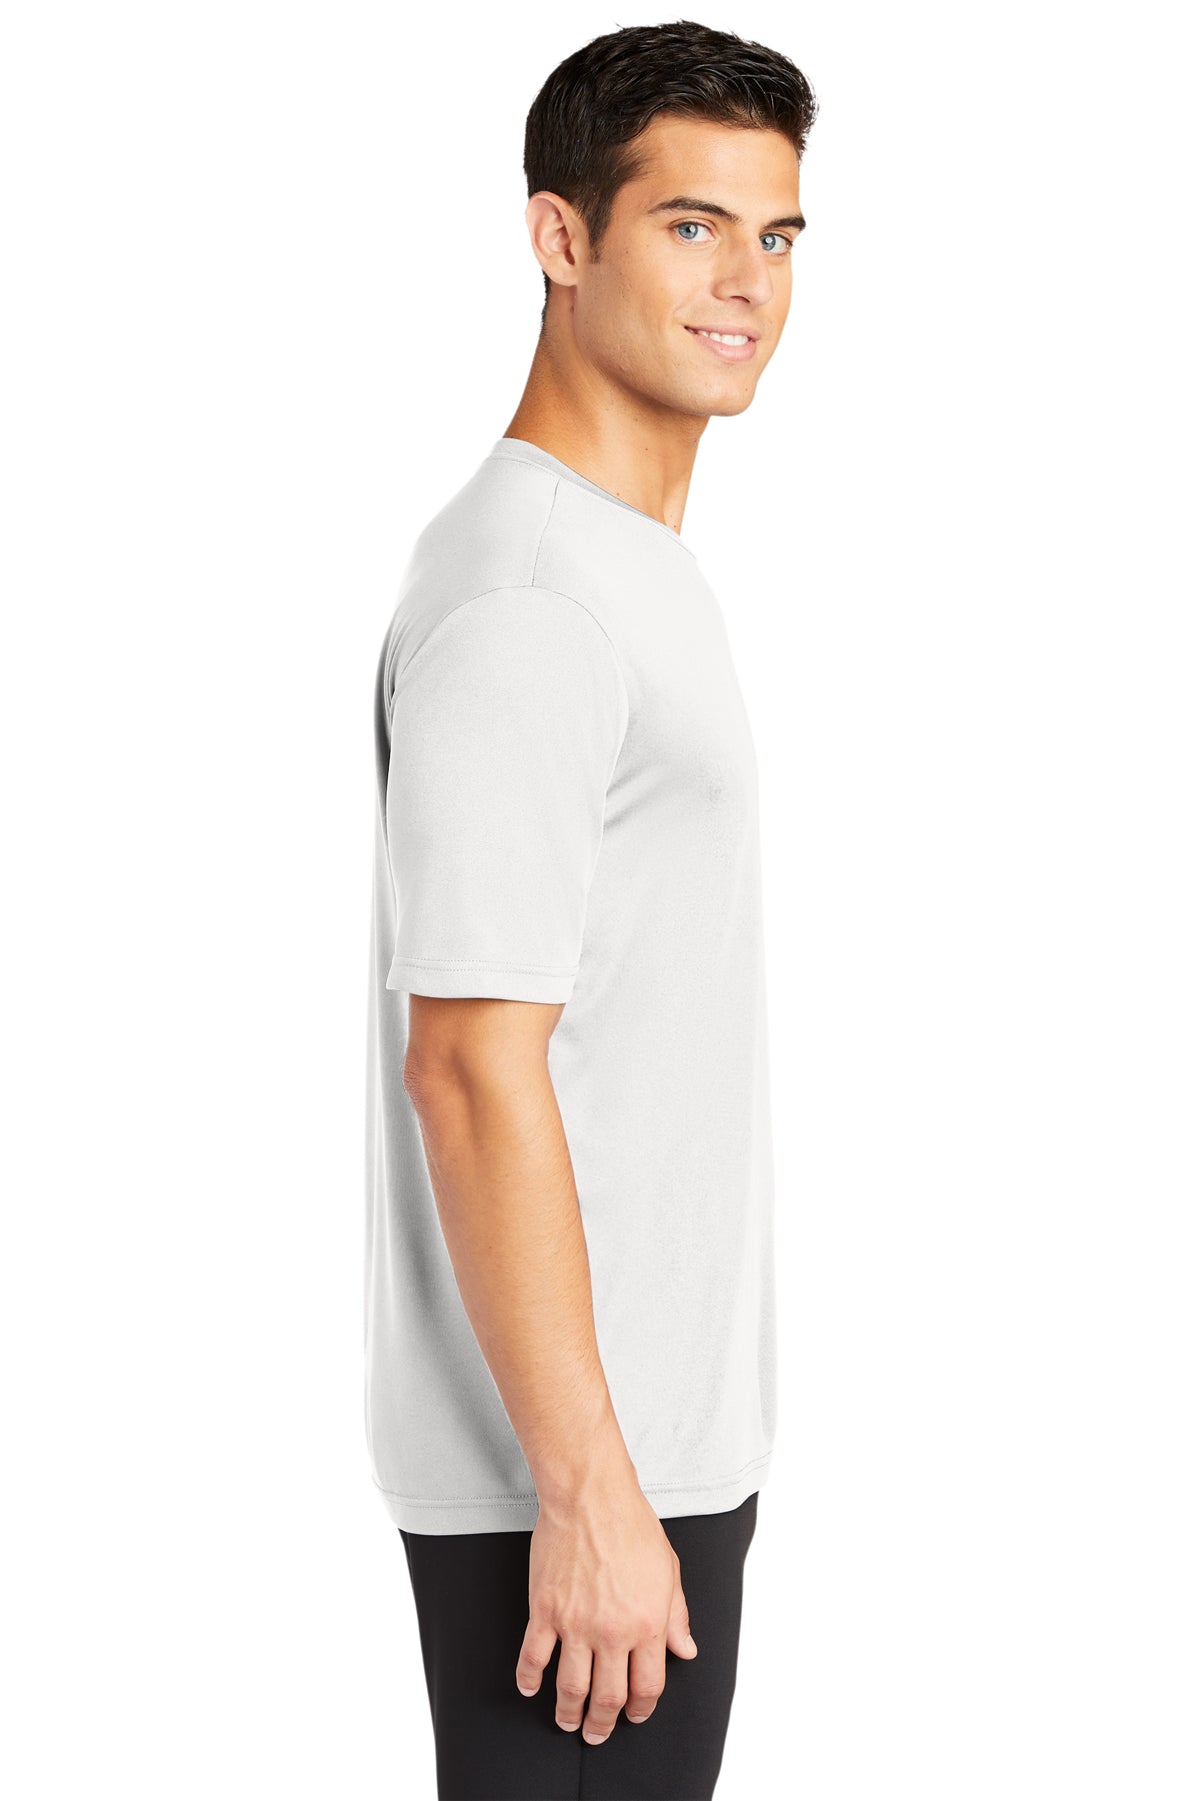 Sport-Tek Tall PosiCharge Branded Competitor Tee's, White